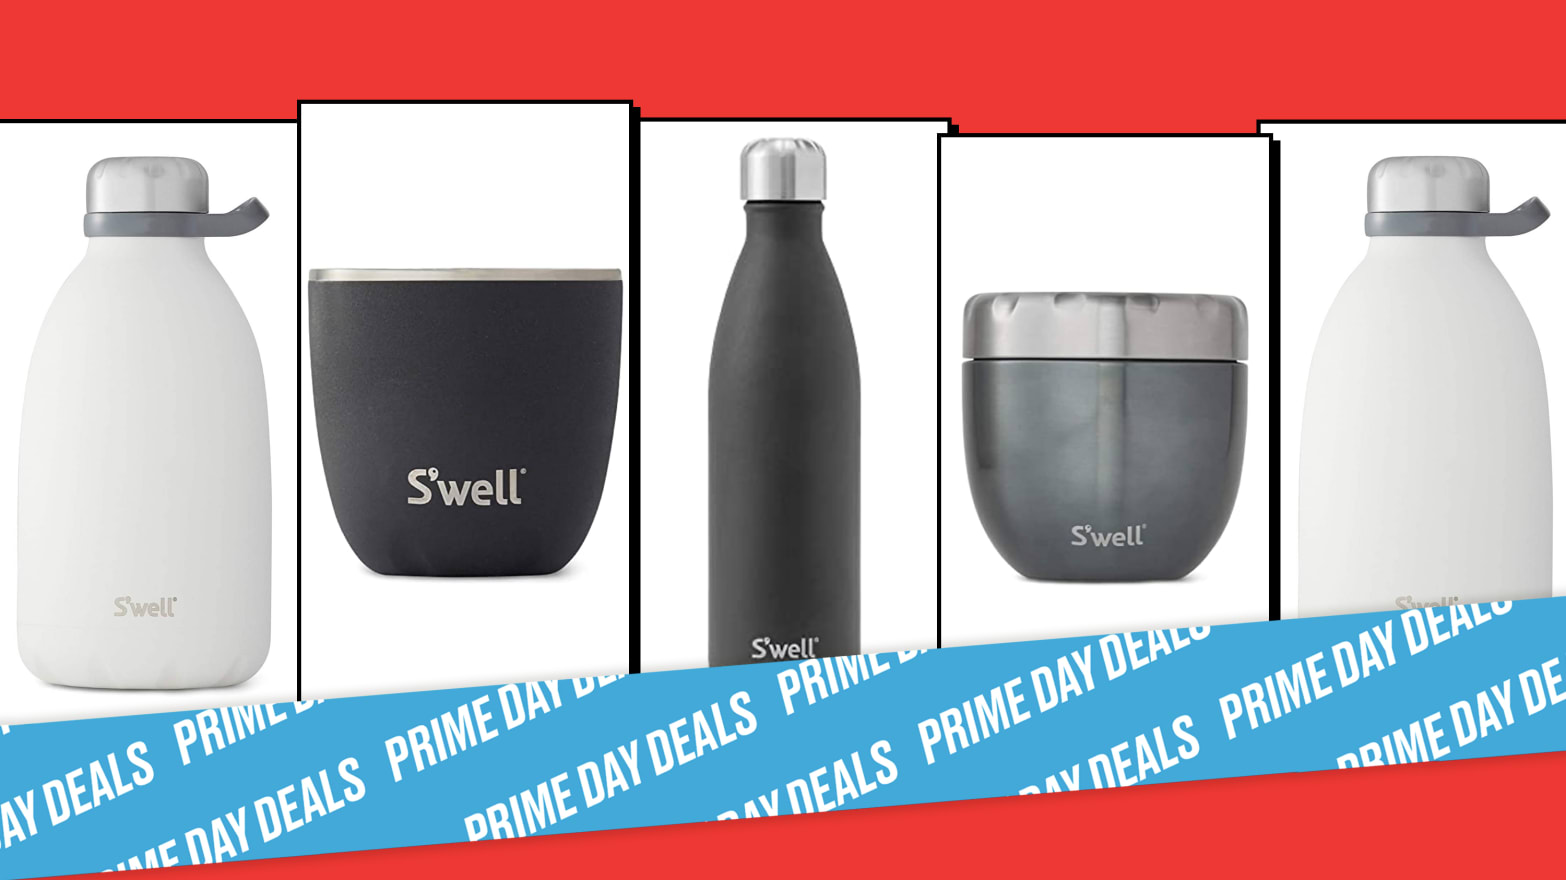 S'well 17 oz Stainless Steel Water Bottle Onyx